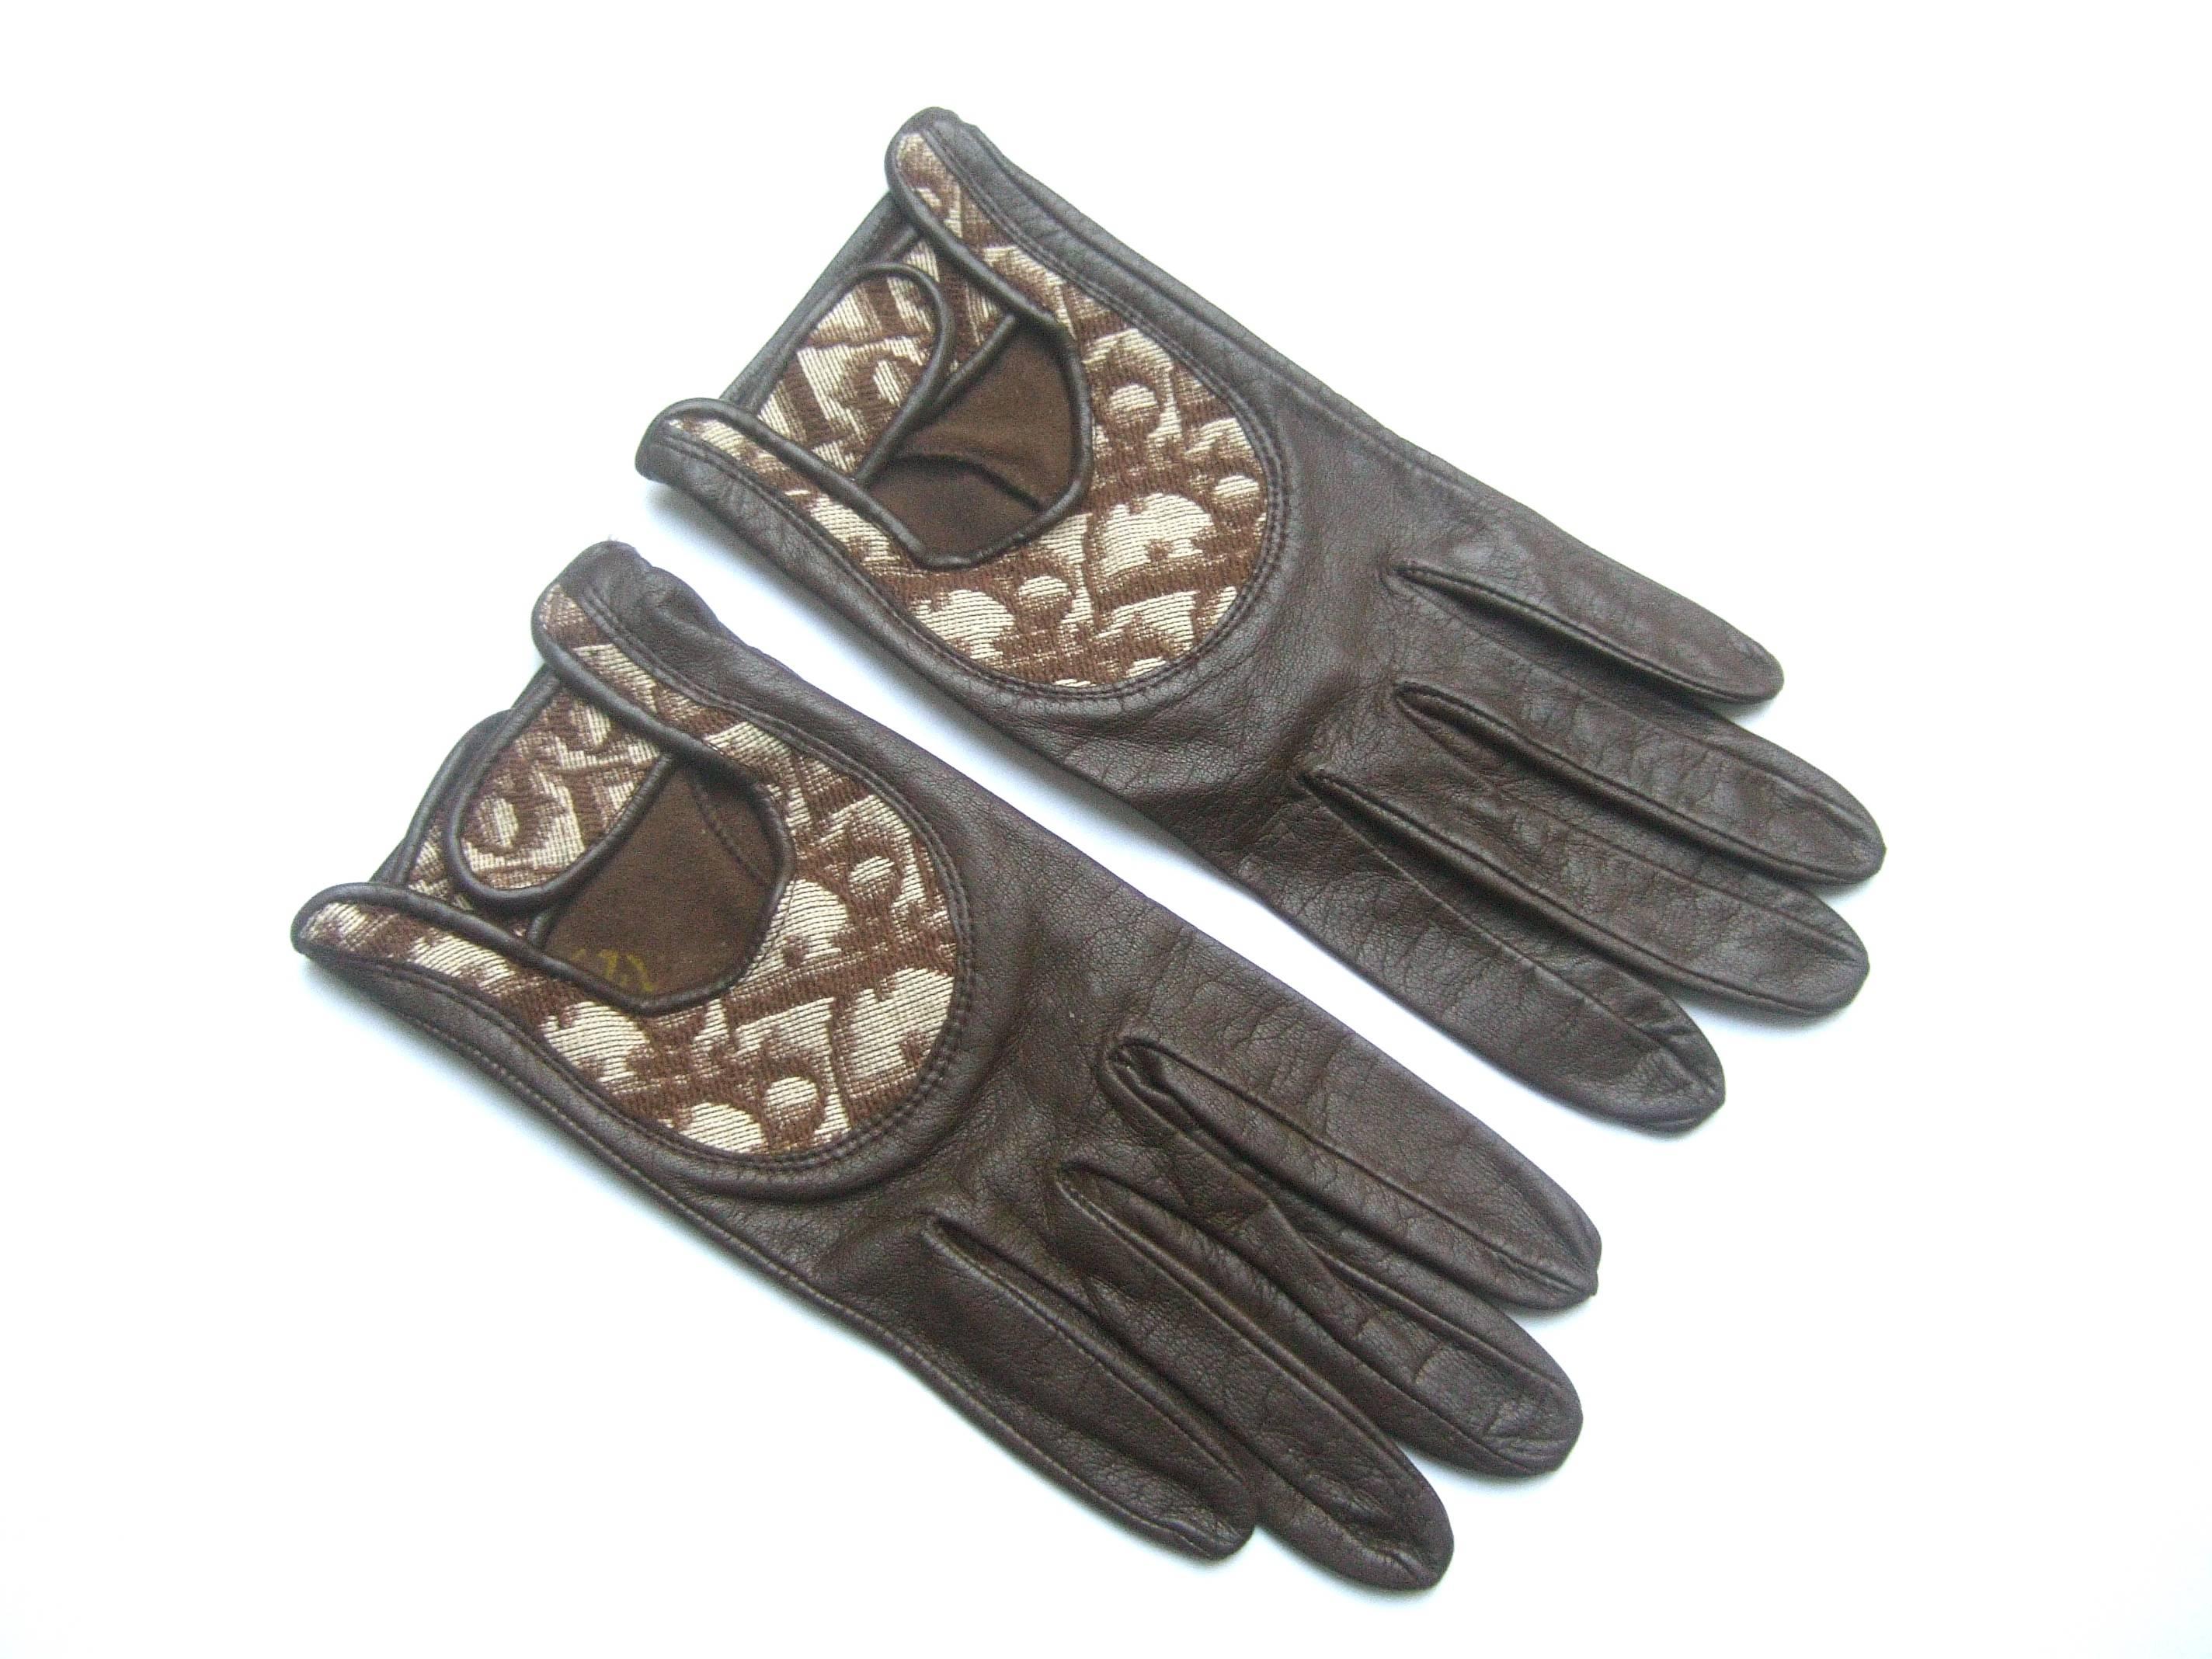 Christian Dior Chocolate brown leather driving gloves c 1970s
The stylish designer gloves are constructed with supple
dark brown leather

The top of each glove has a cloth panel insert with
Dior's name repeated throughout; with a key